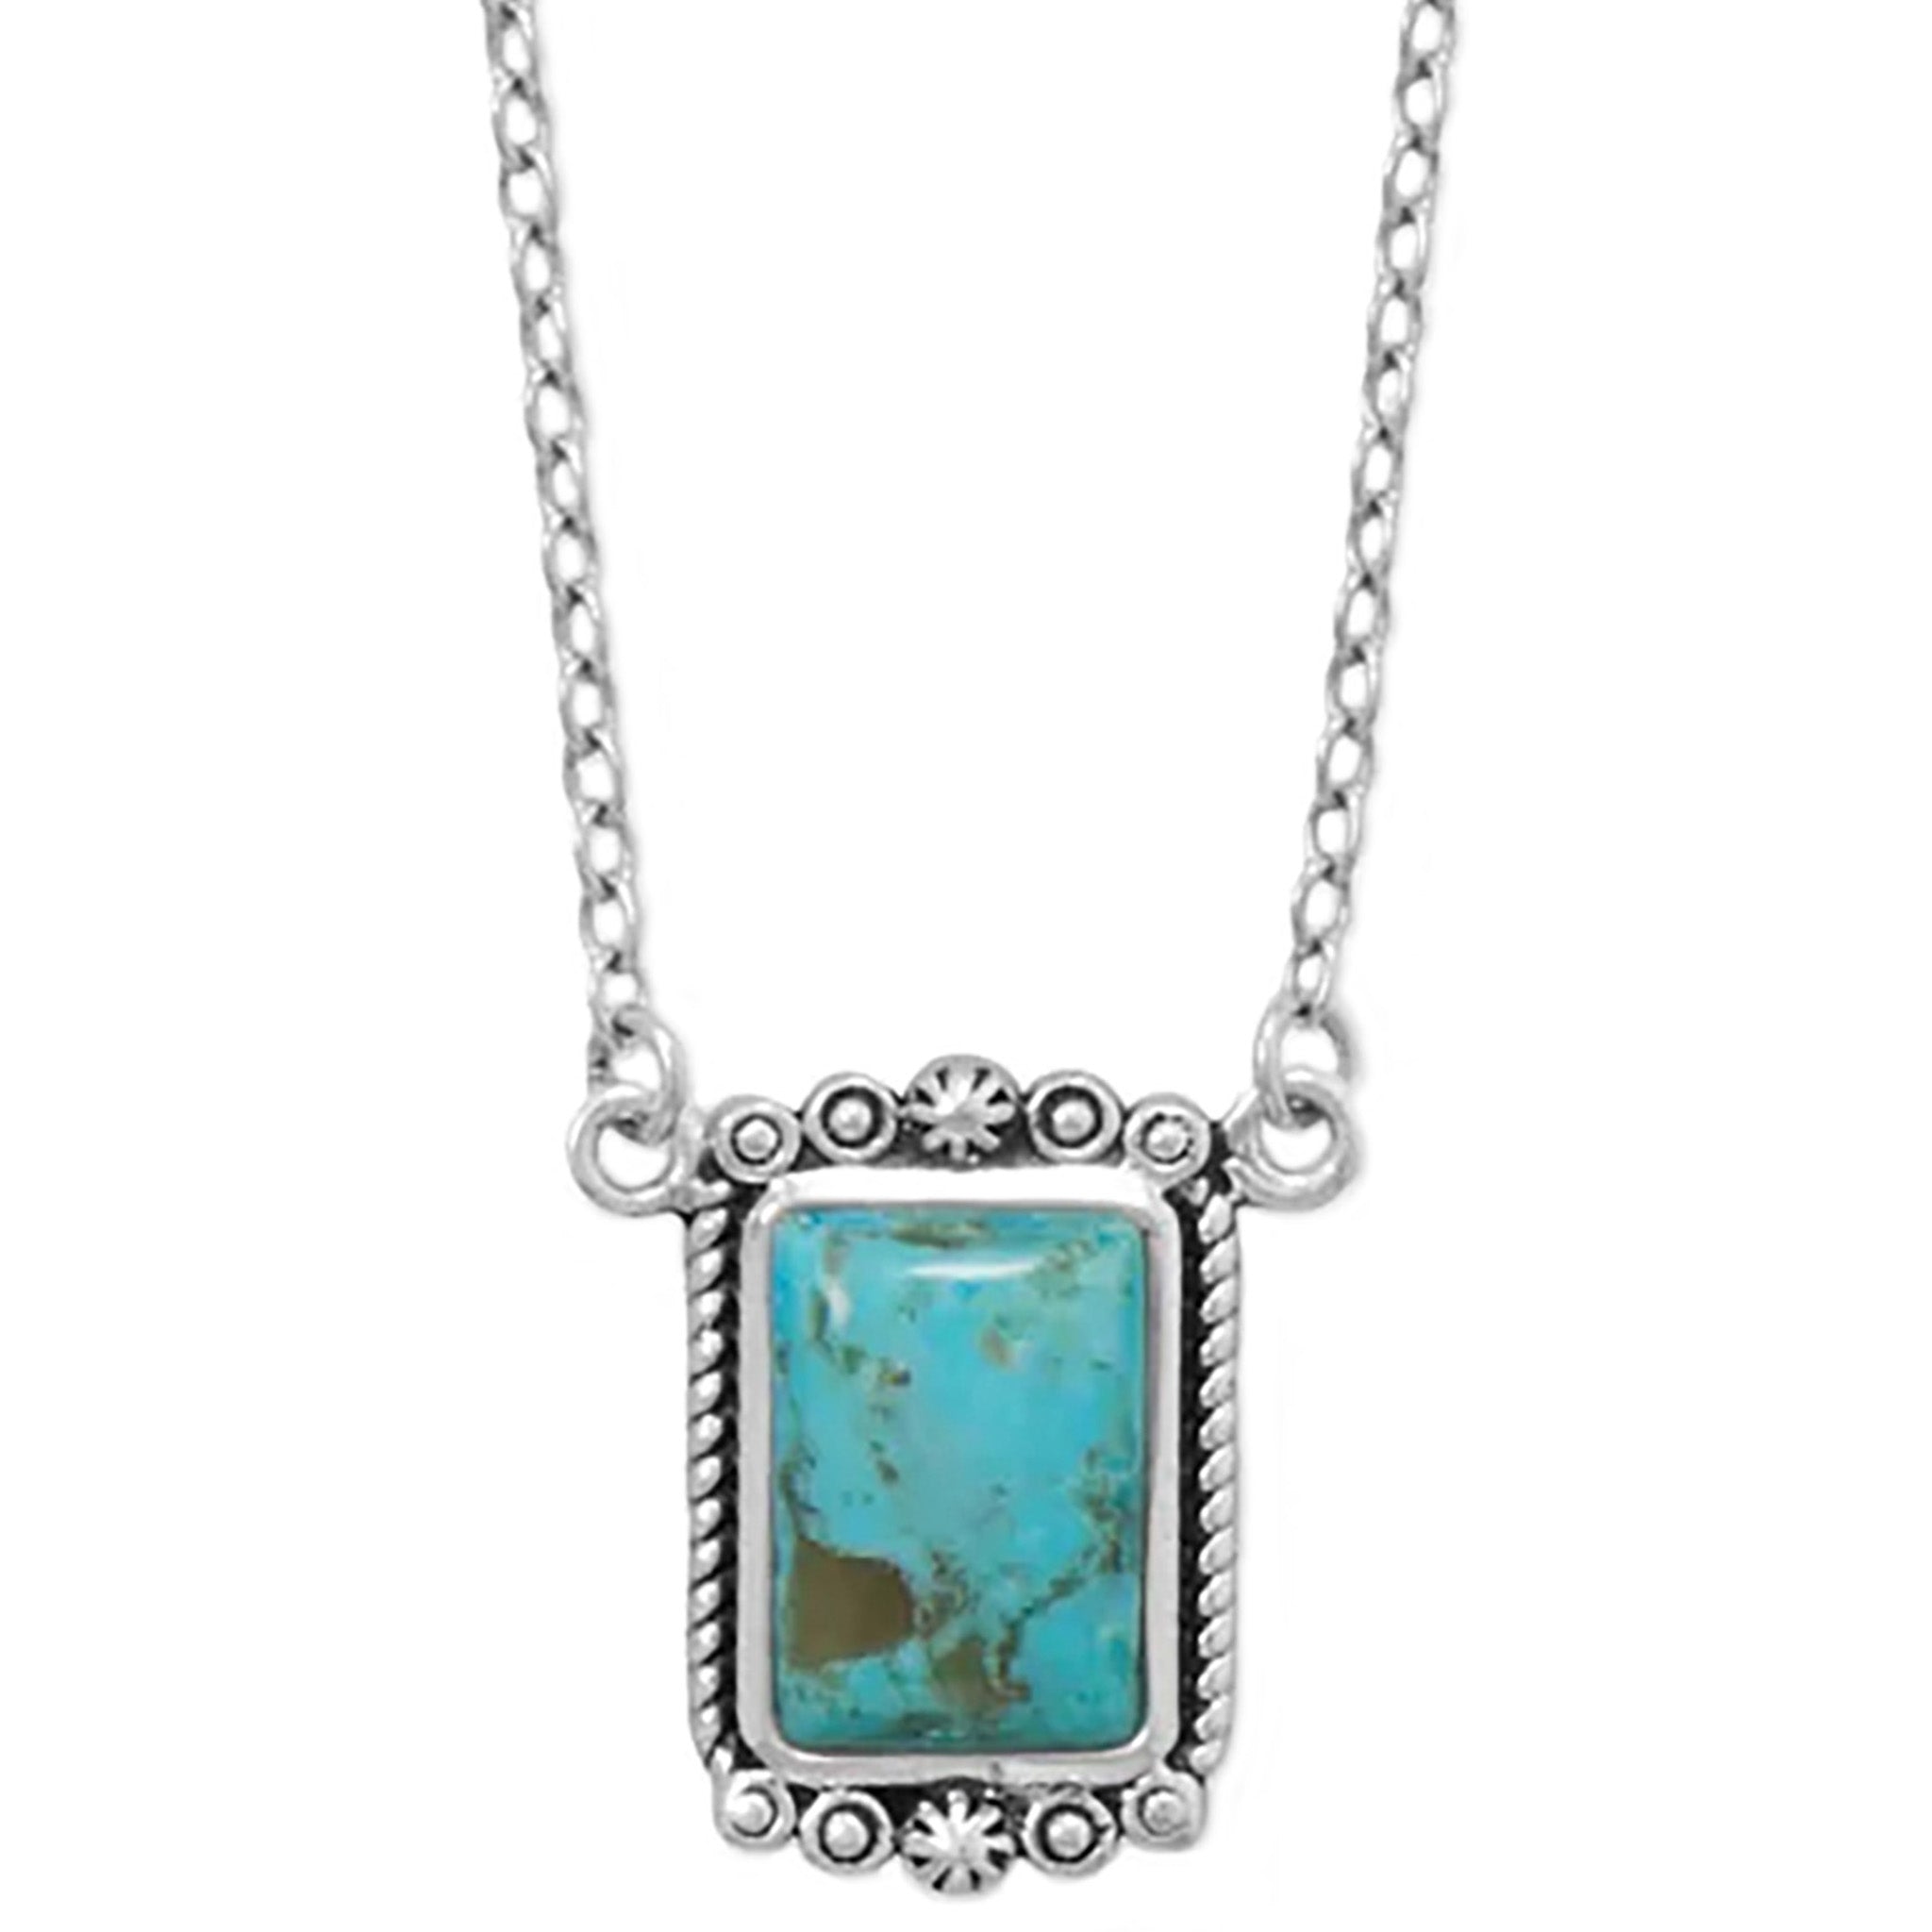 Rope Edge Turquoise Necklace